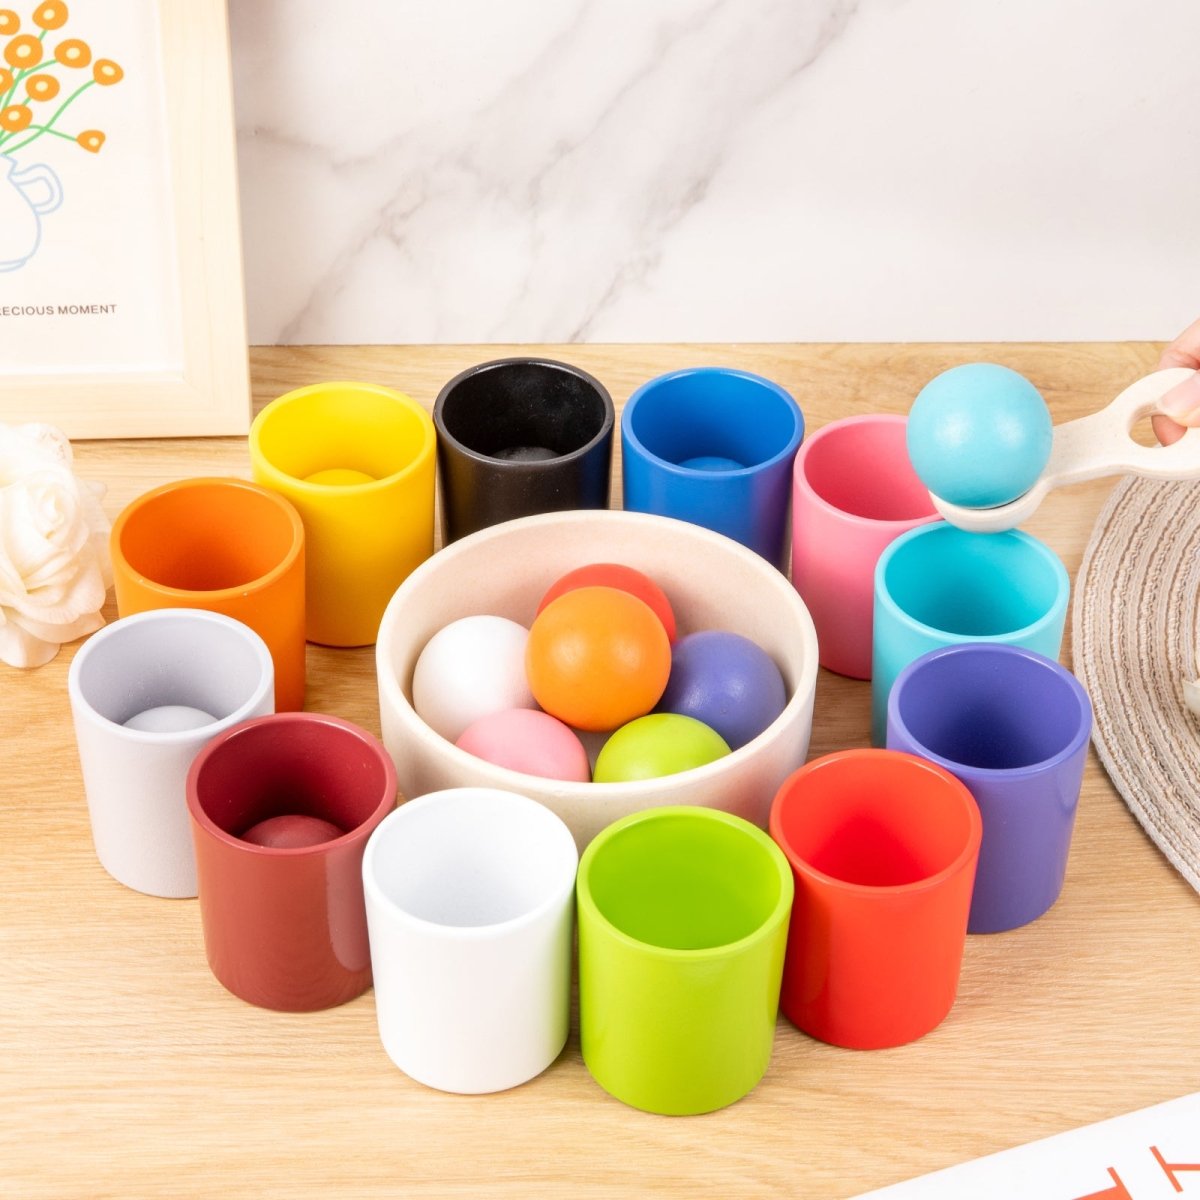 Ball and Cup Color Sorter - Ball and Cup Color Sorter - Curious Melodies